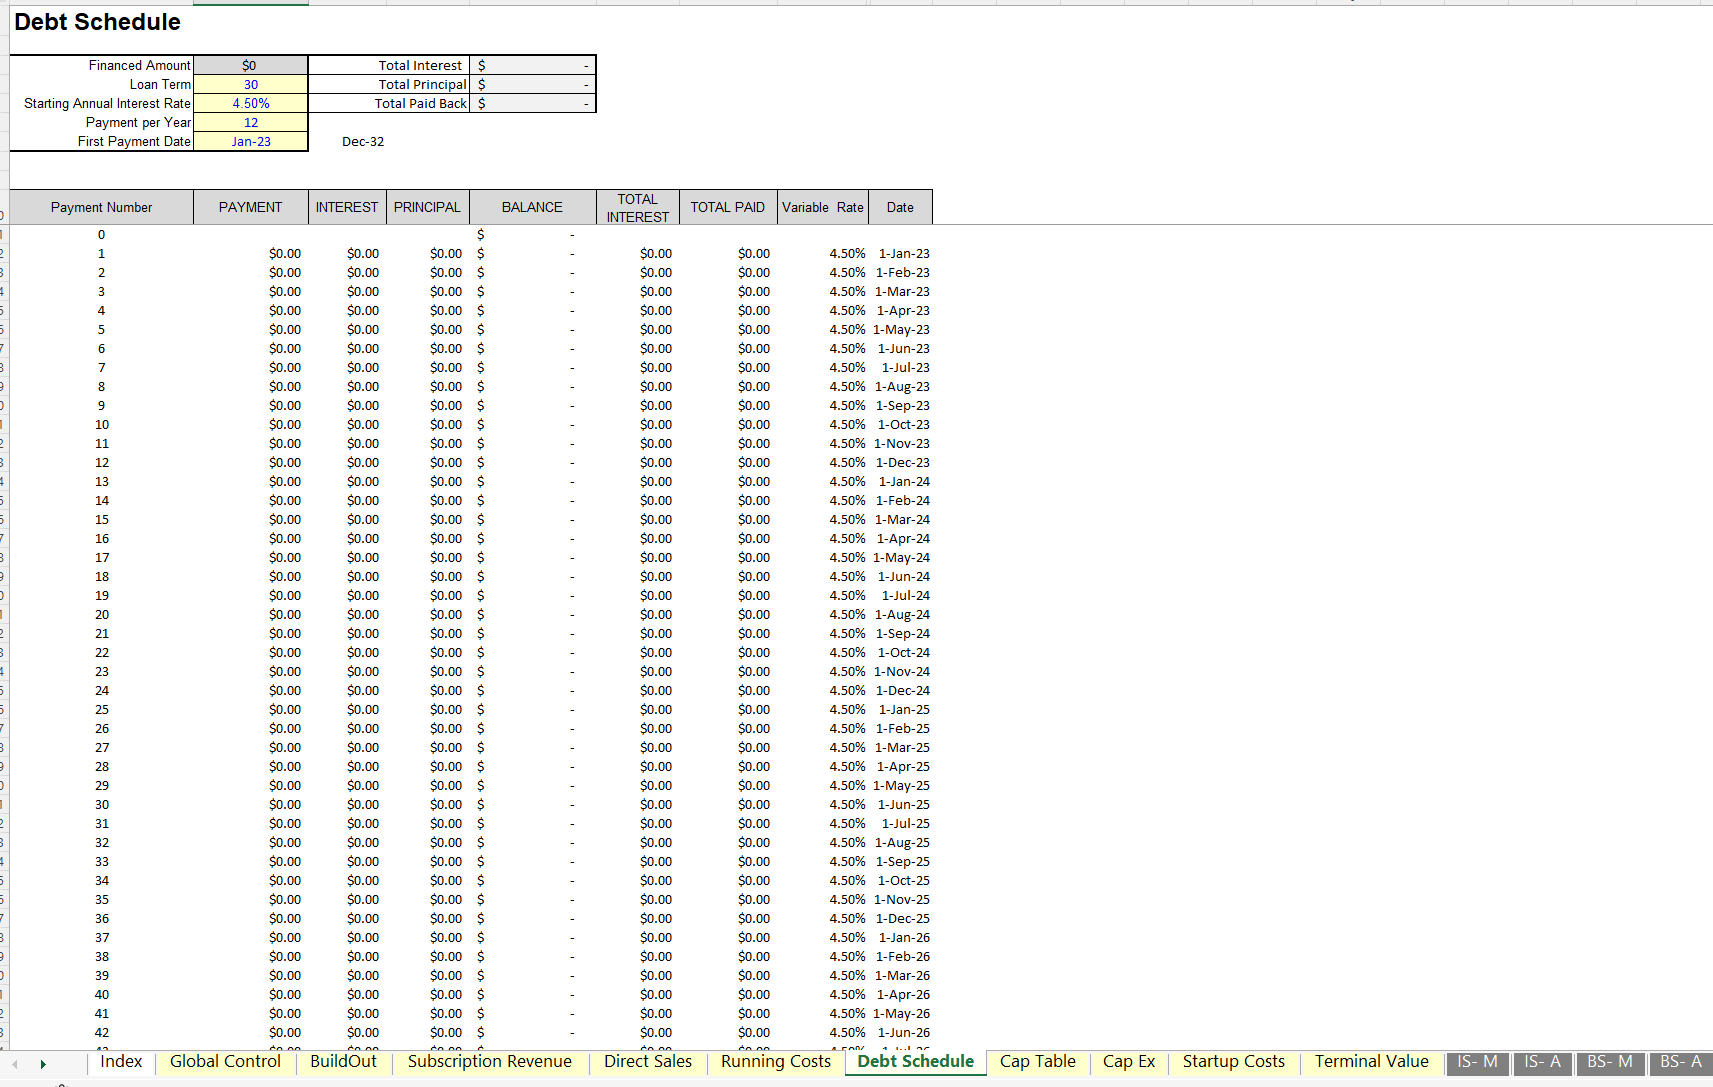 Product-as-a-Service Financial Model (Excel workbook (XLSX)) Preview Image